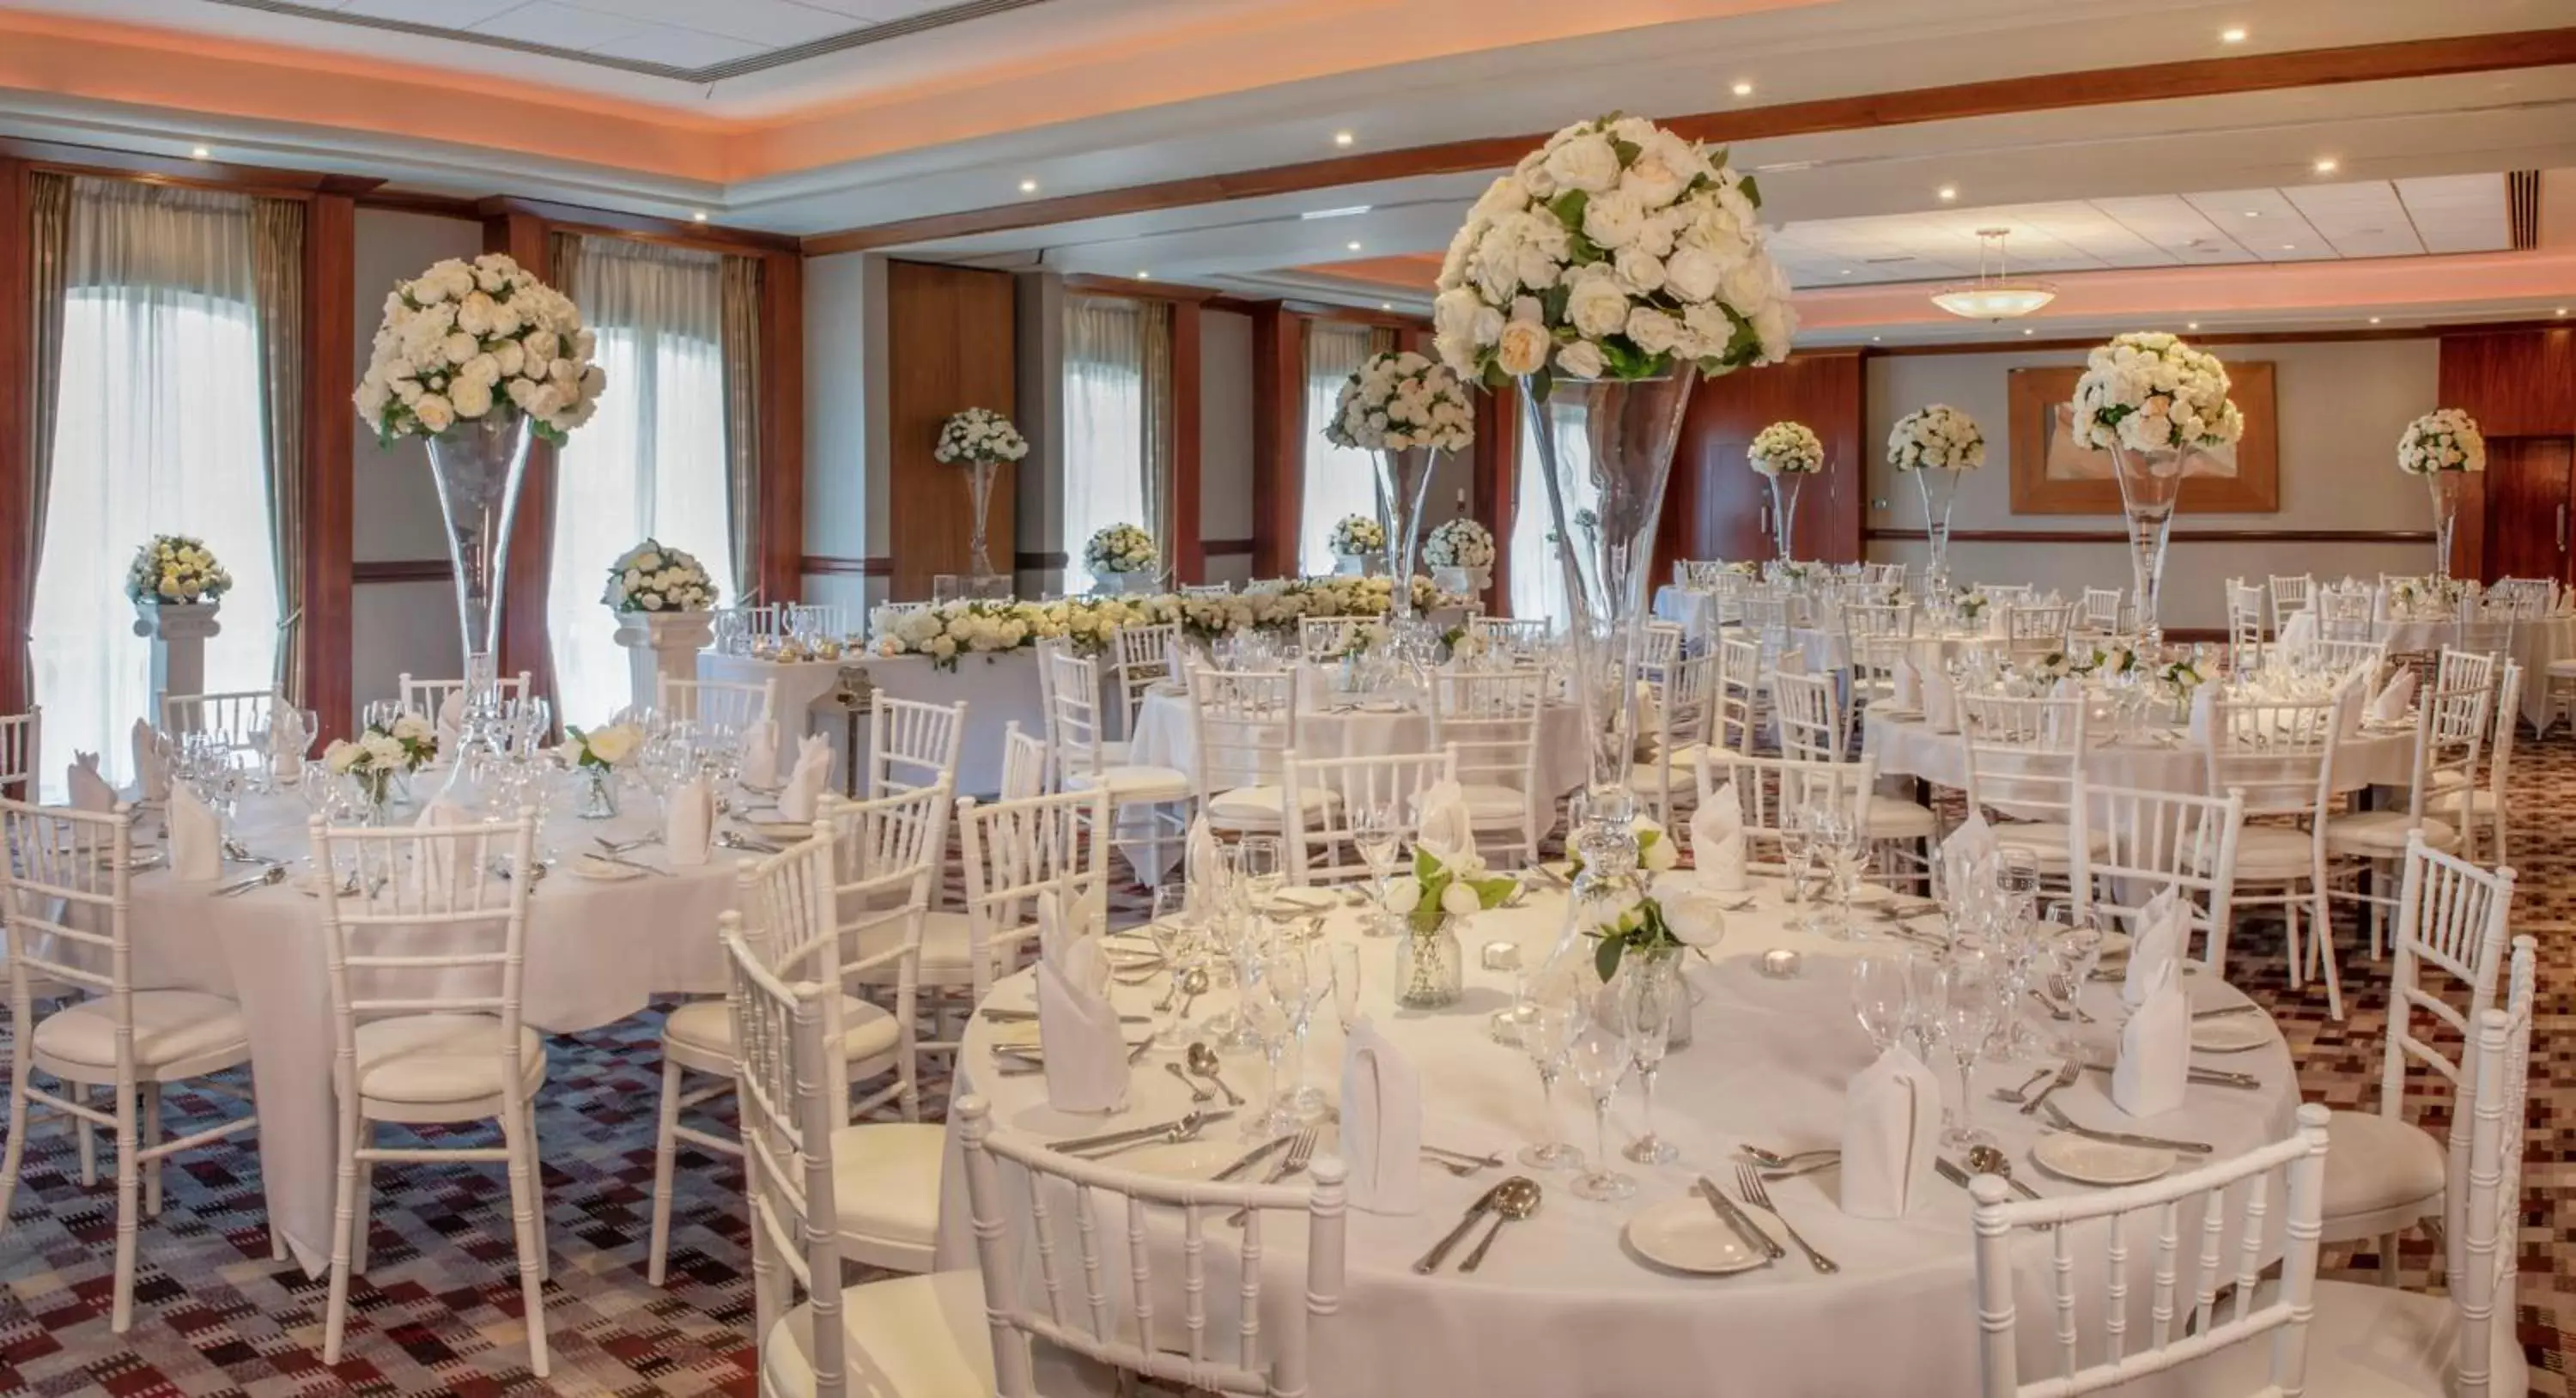 Area and facilities, Banquet Facilities in Thorpe Park Hotel and Spa